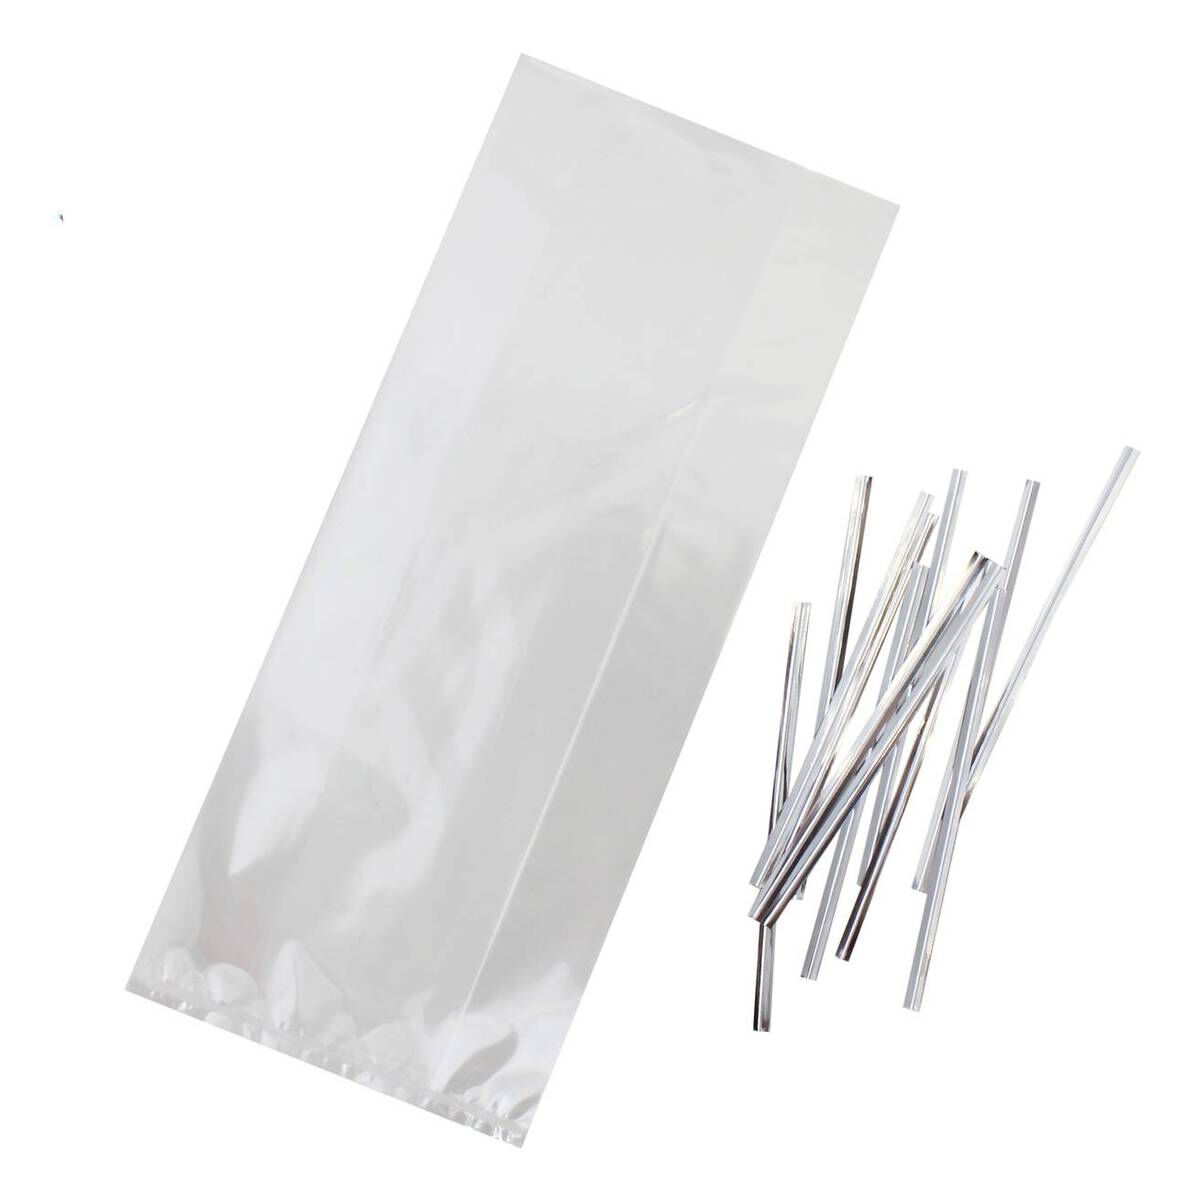 641476 1000 1 clear treat bags with ties 10 x 24cm 25 pack